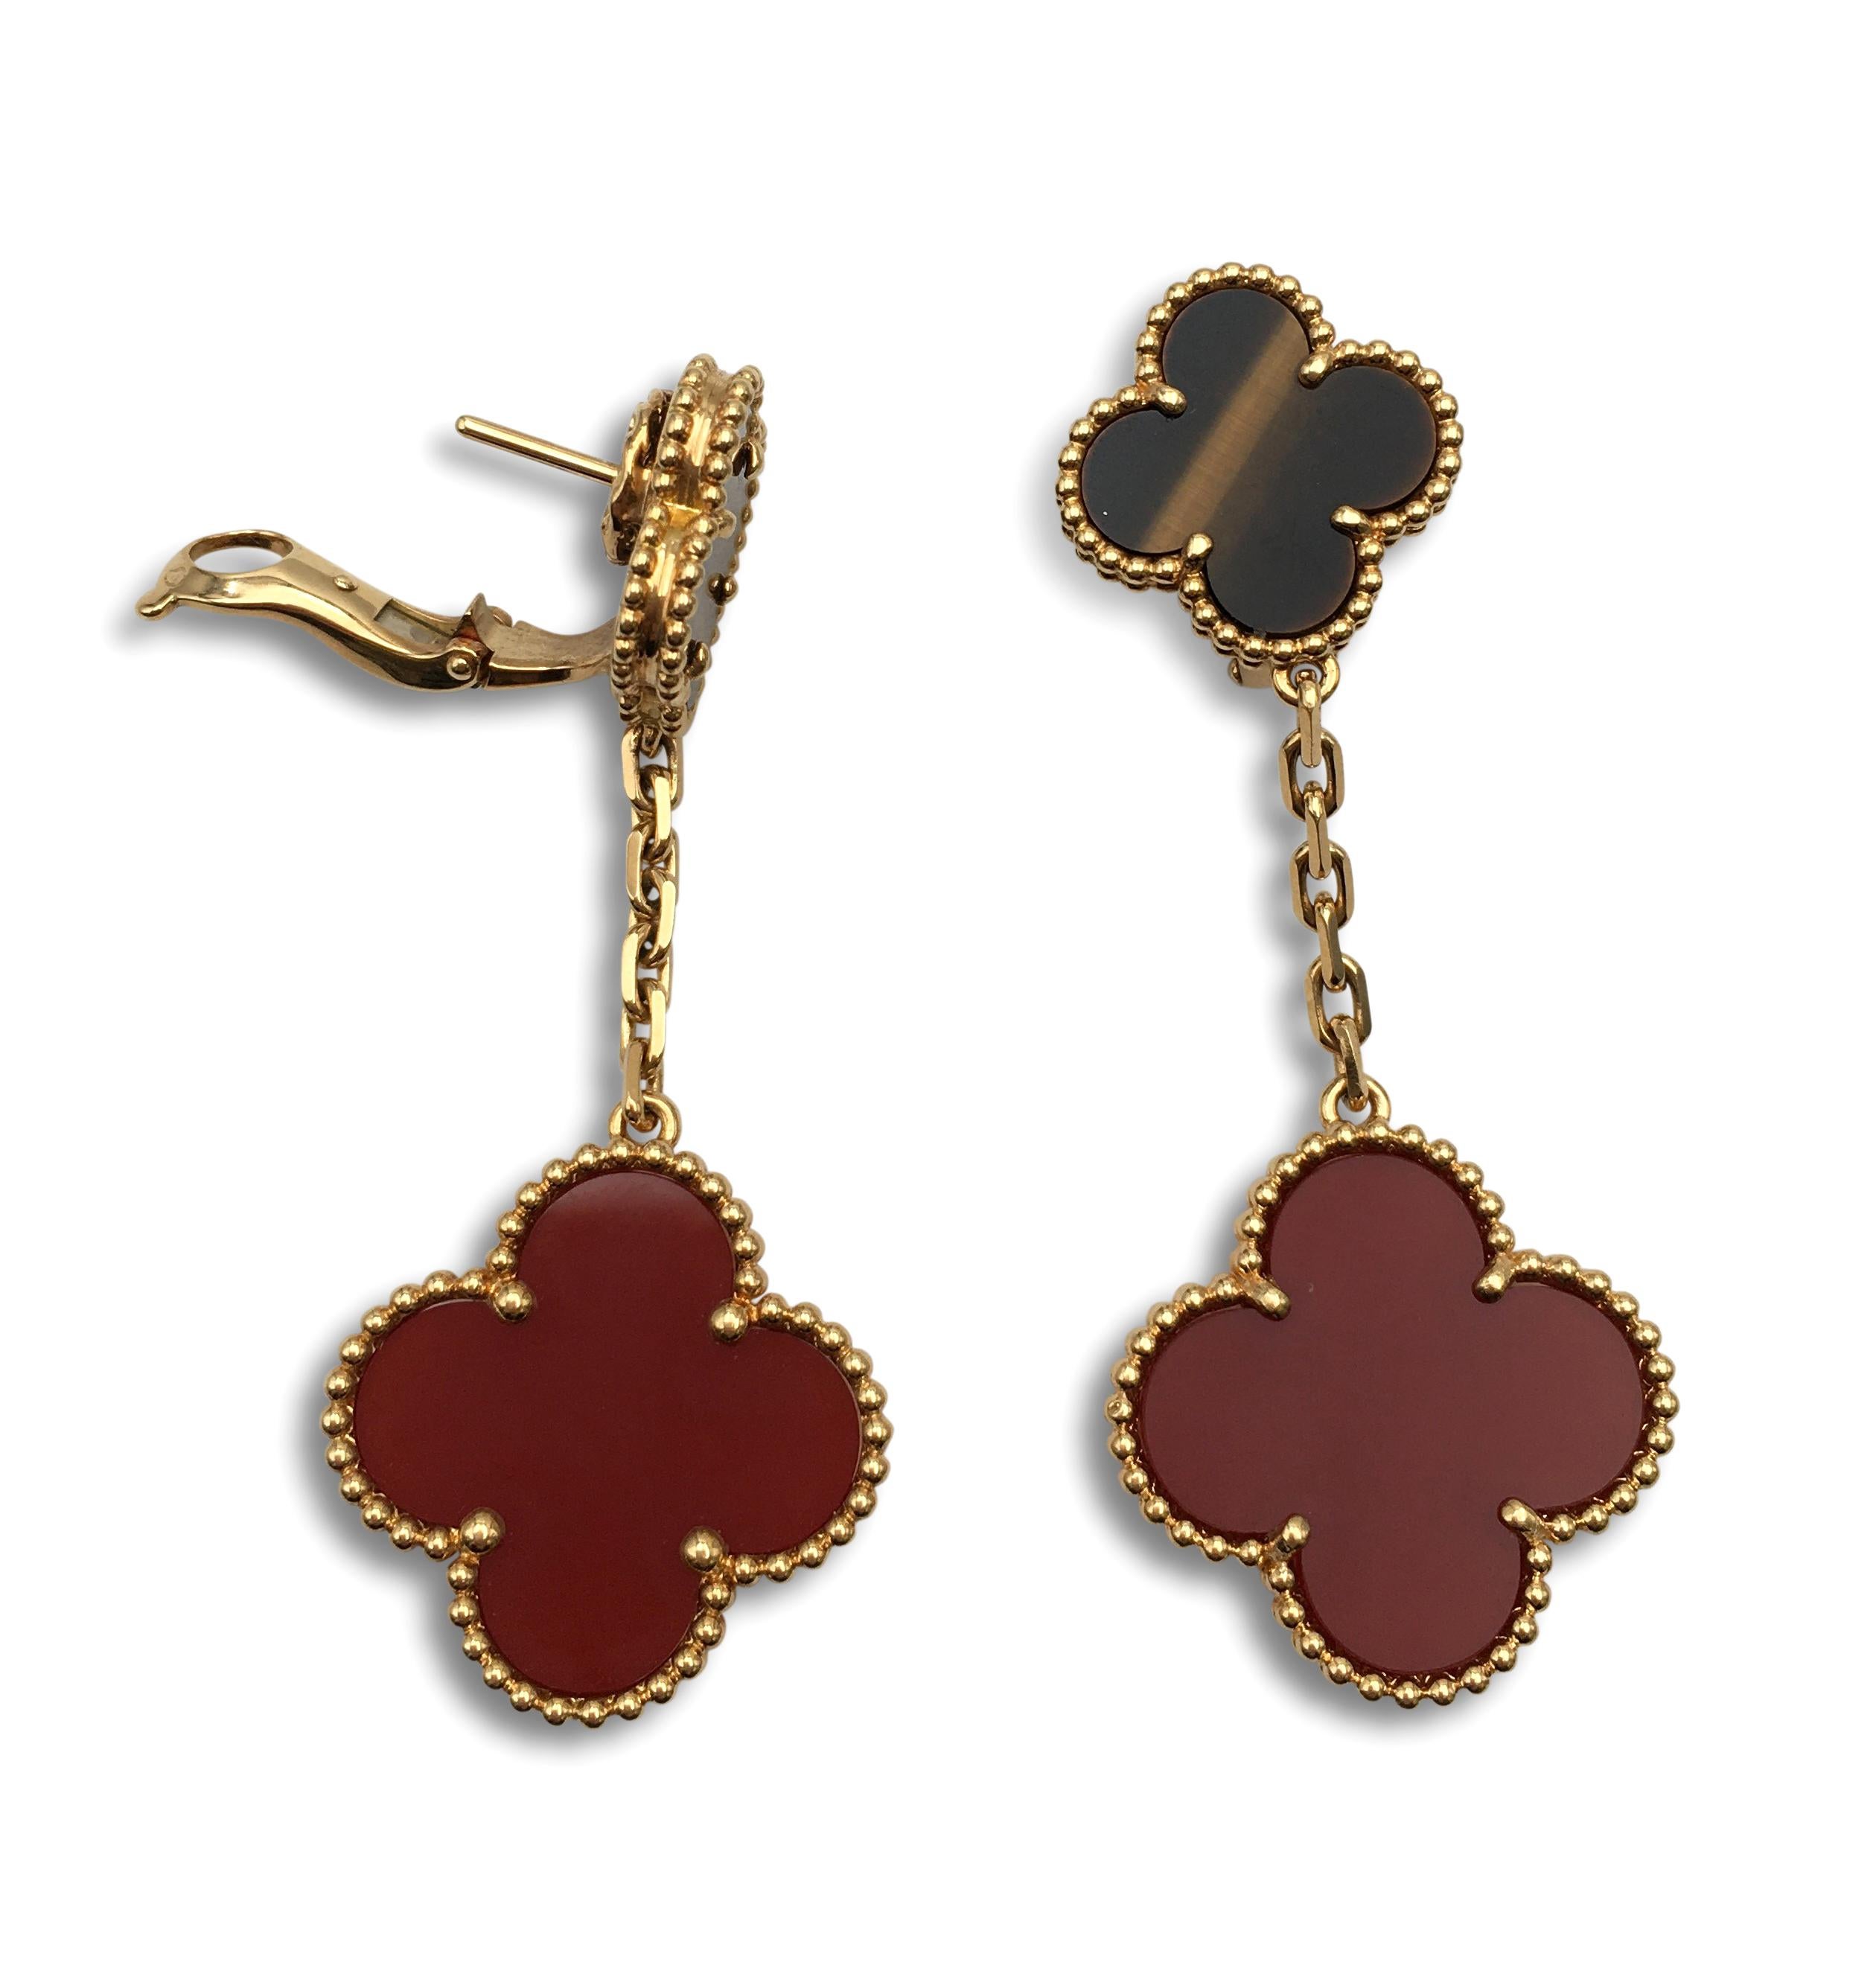 Authentic Van Cleef & Arpels 'Magic Alhambra' earrings crafted in 18 karat yellow gold featuring two different-sized Alhambra clover motifs; one made from carnelian and the other with tigers eye stone. Signed VCA, Au750, with serial number. The